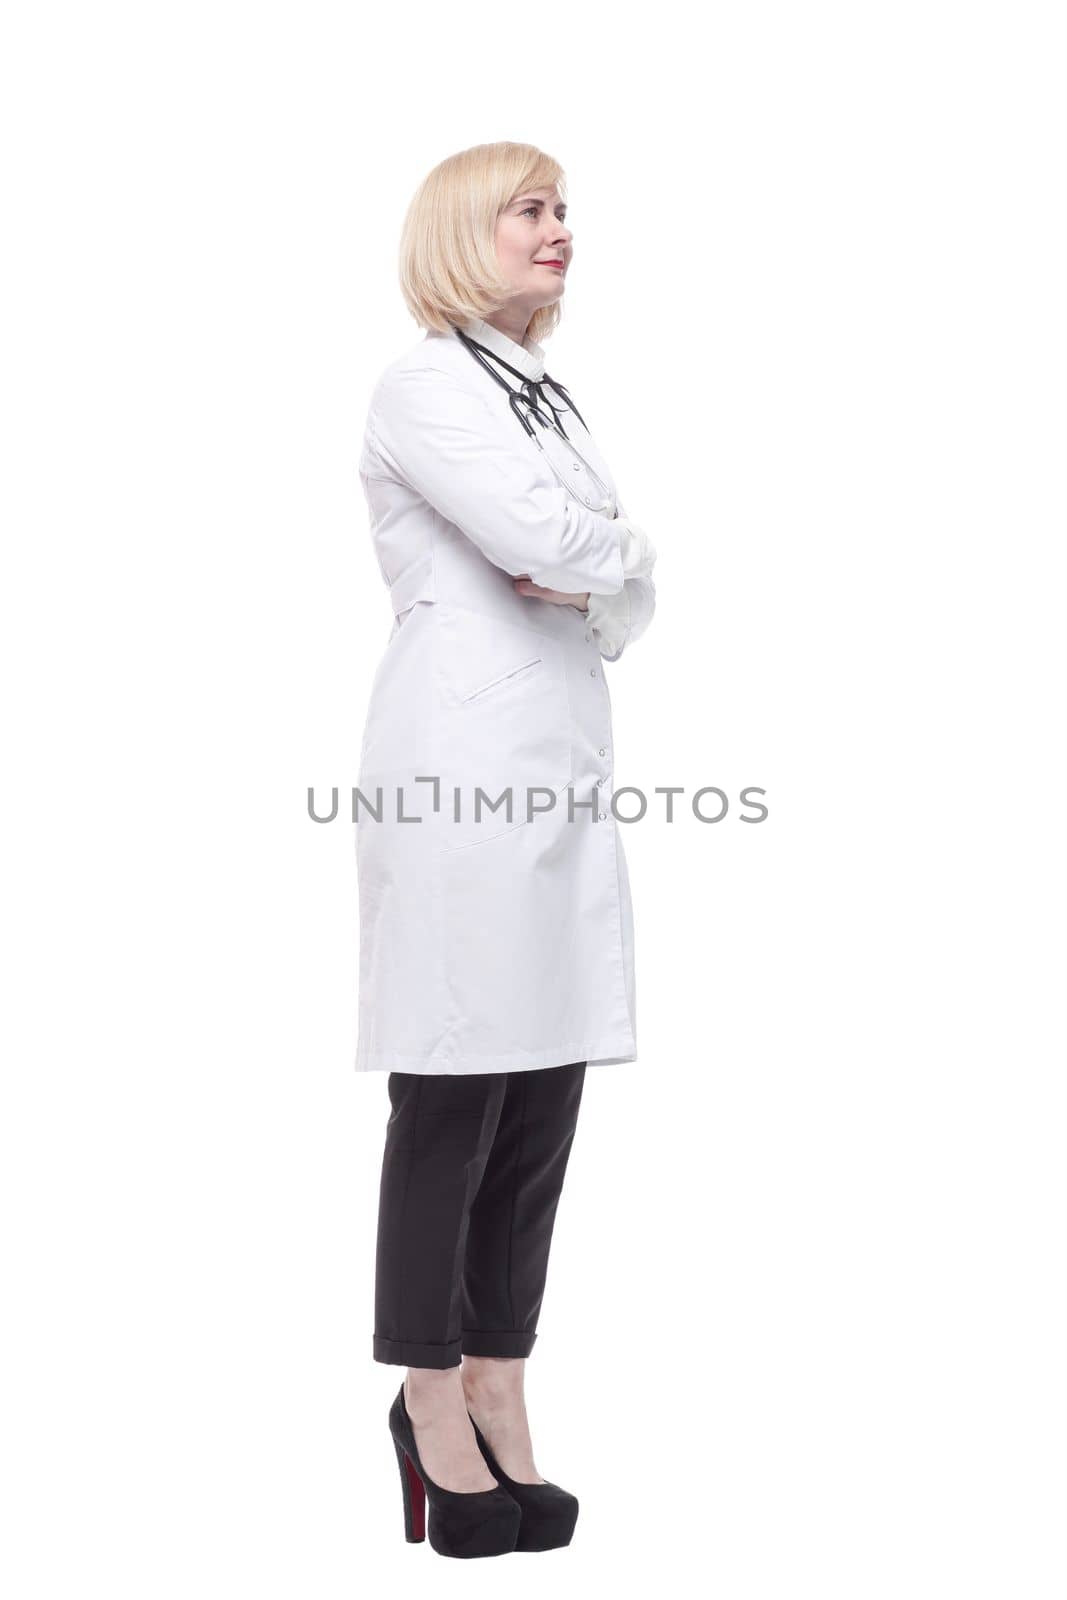 in full growth.qualified female doctor . isolated on a white background.